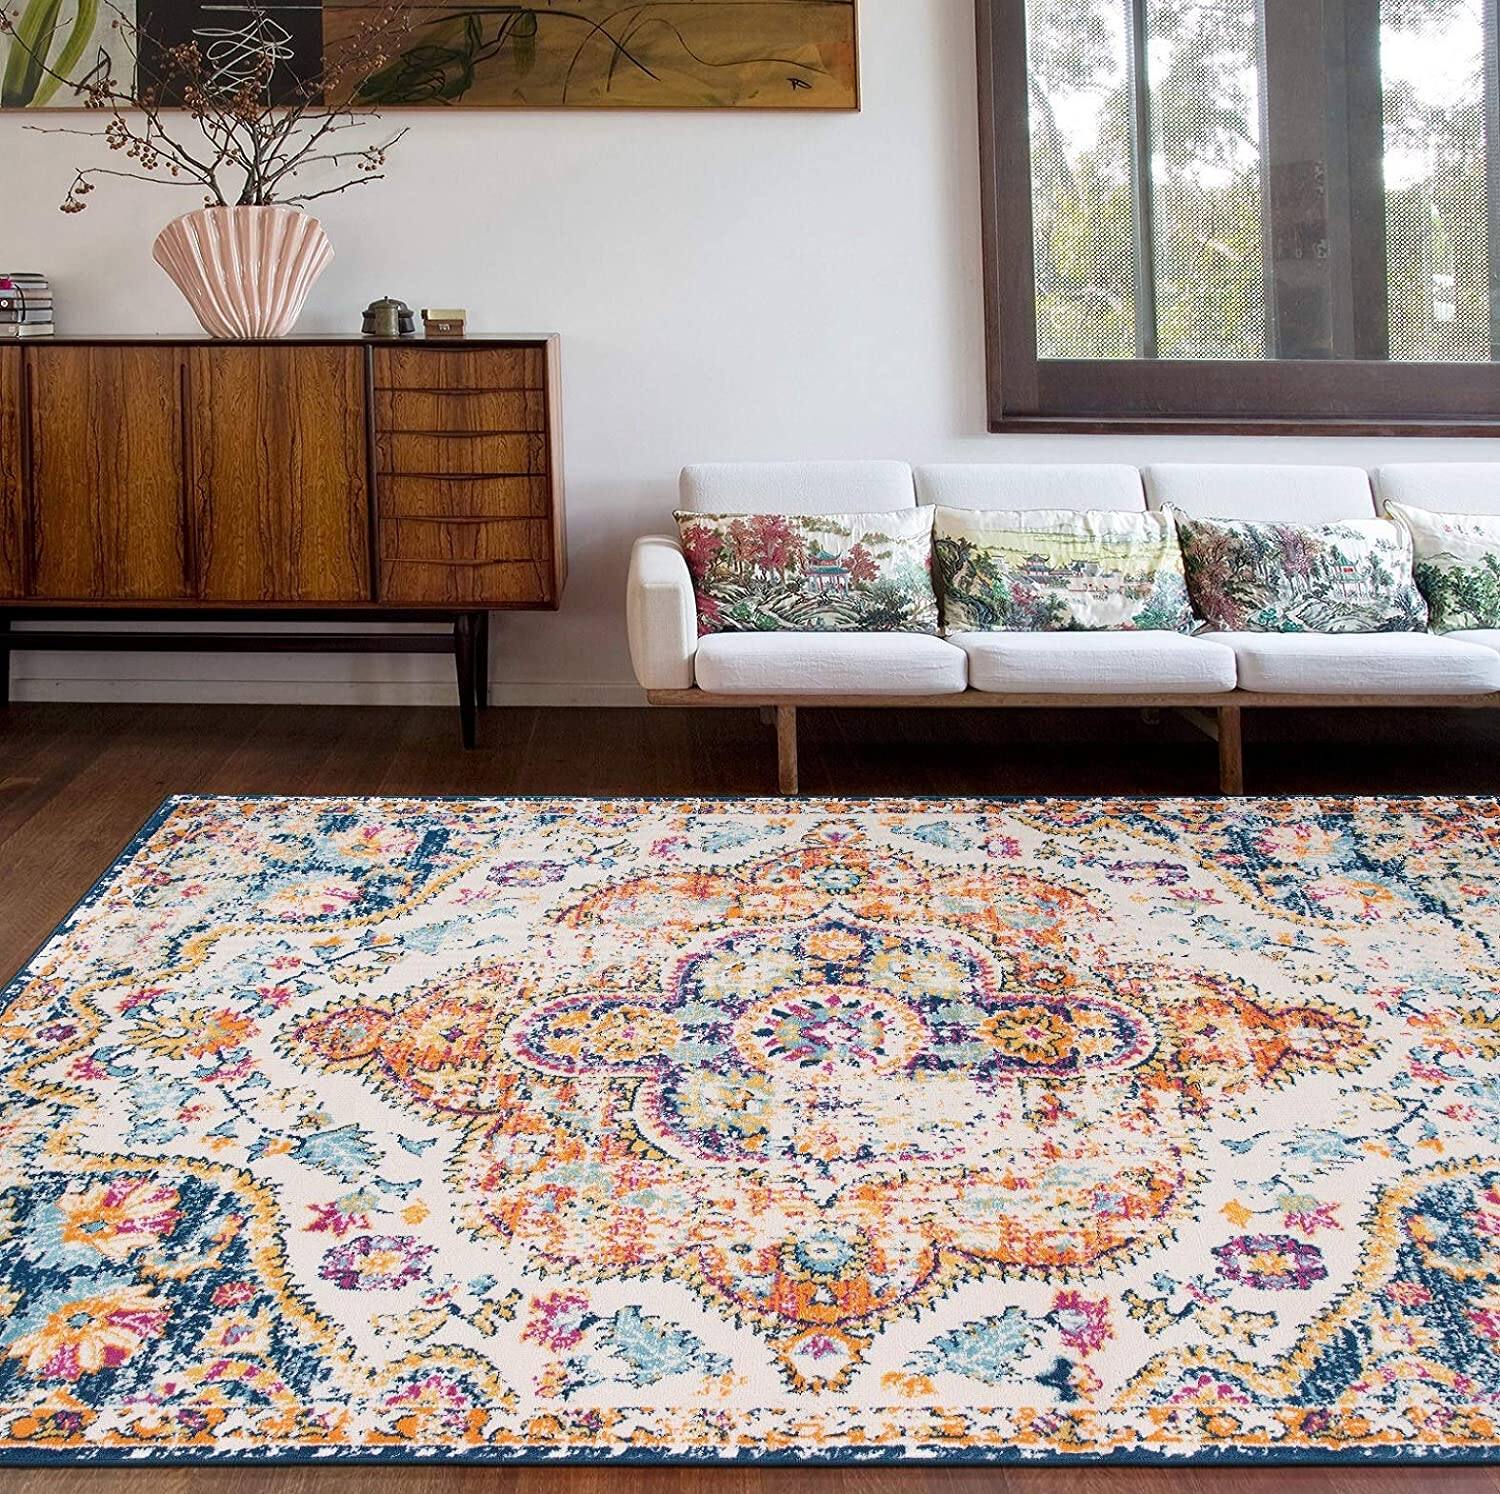 5'x7' Vintage Bohemian Area Rug for $59.90 + Free Shipping